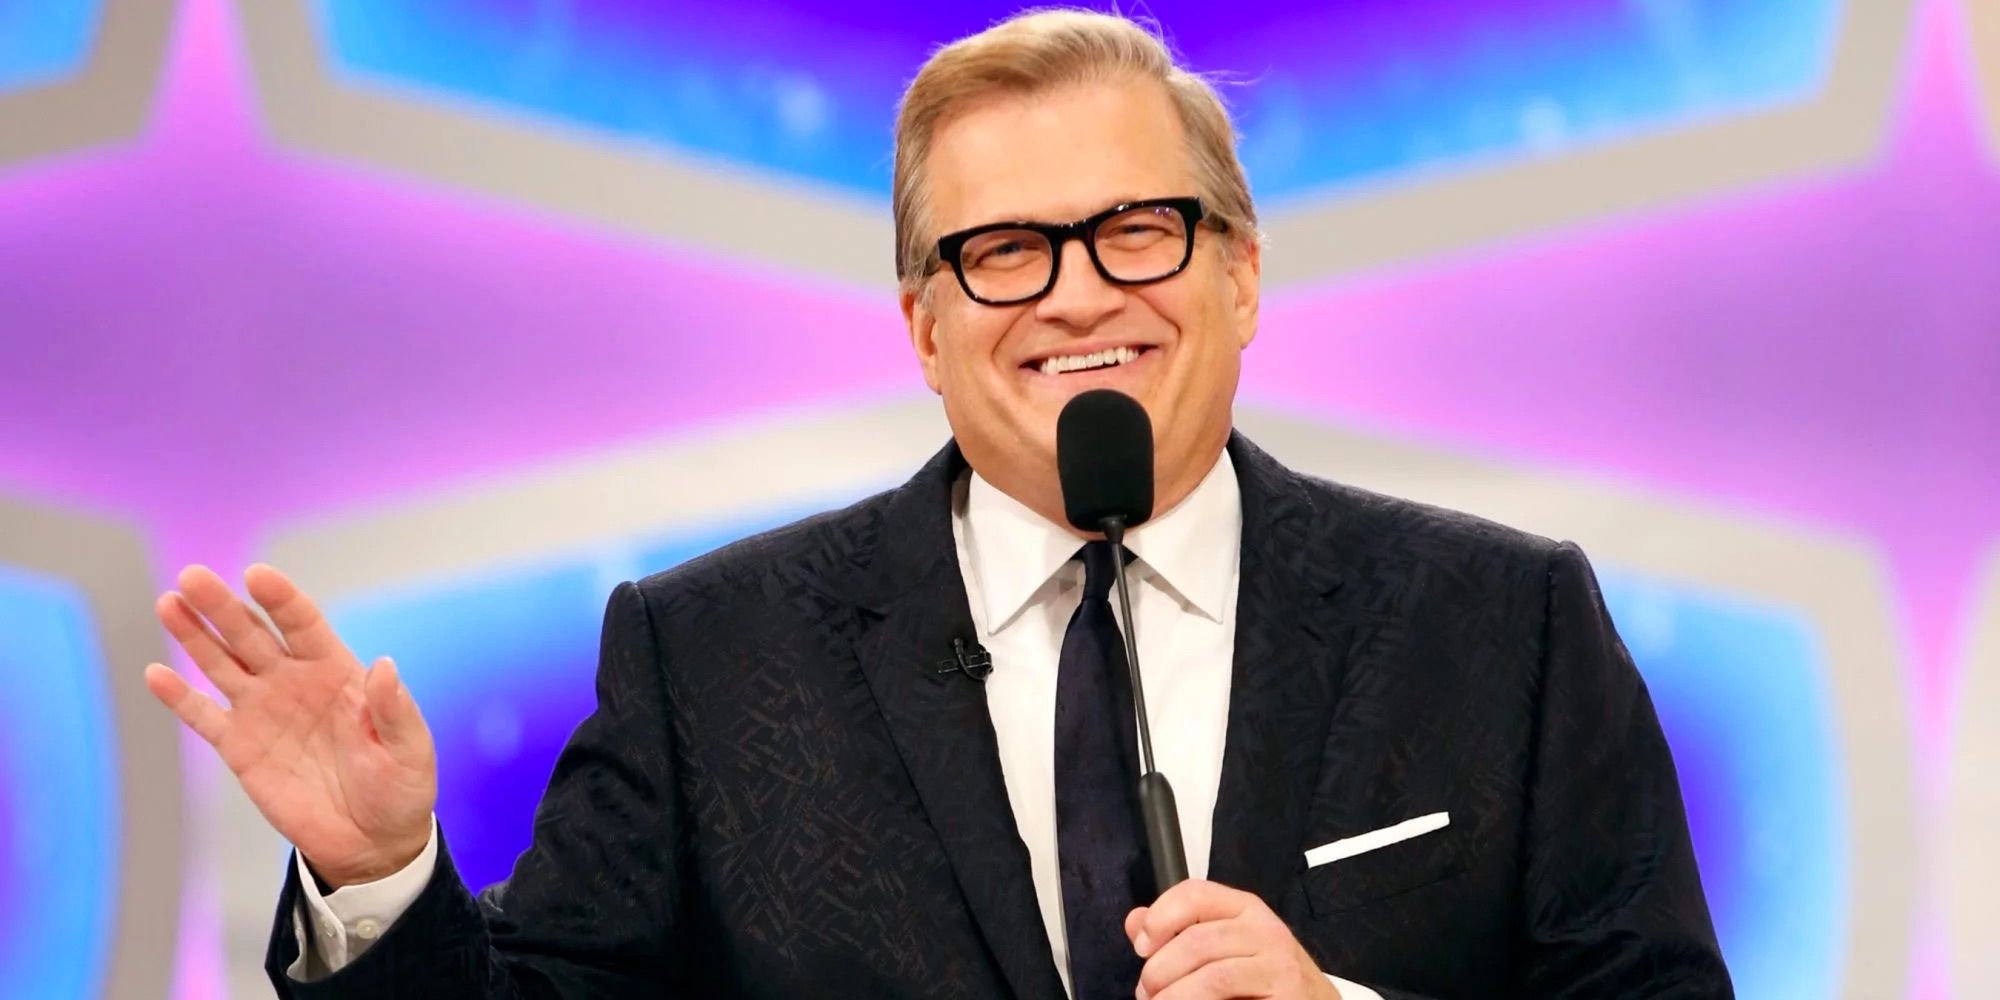 The Price Is Right Gifts Audiences Santa Drew Carey [EXCLUSIVE CLIP]